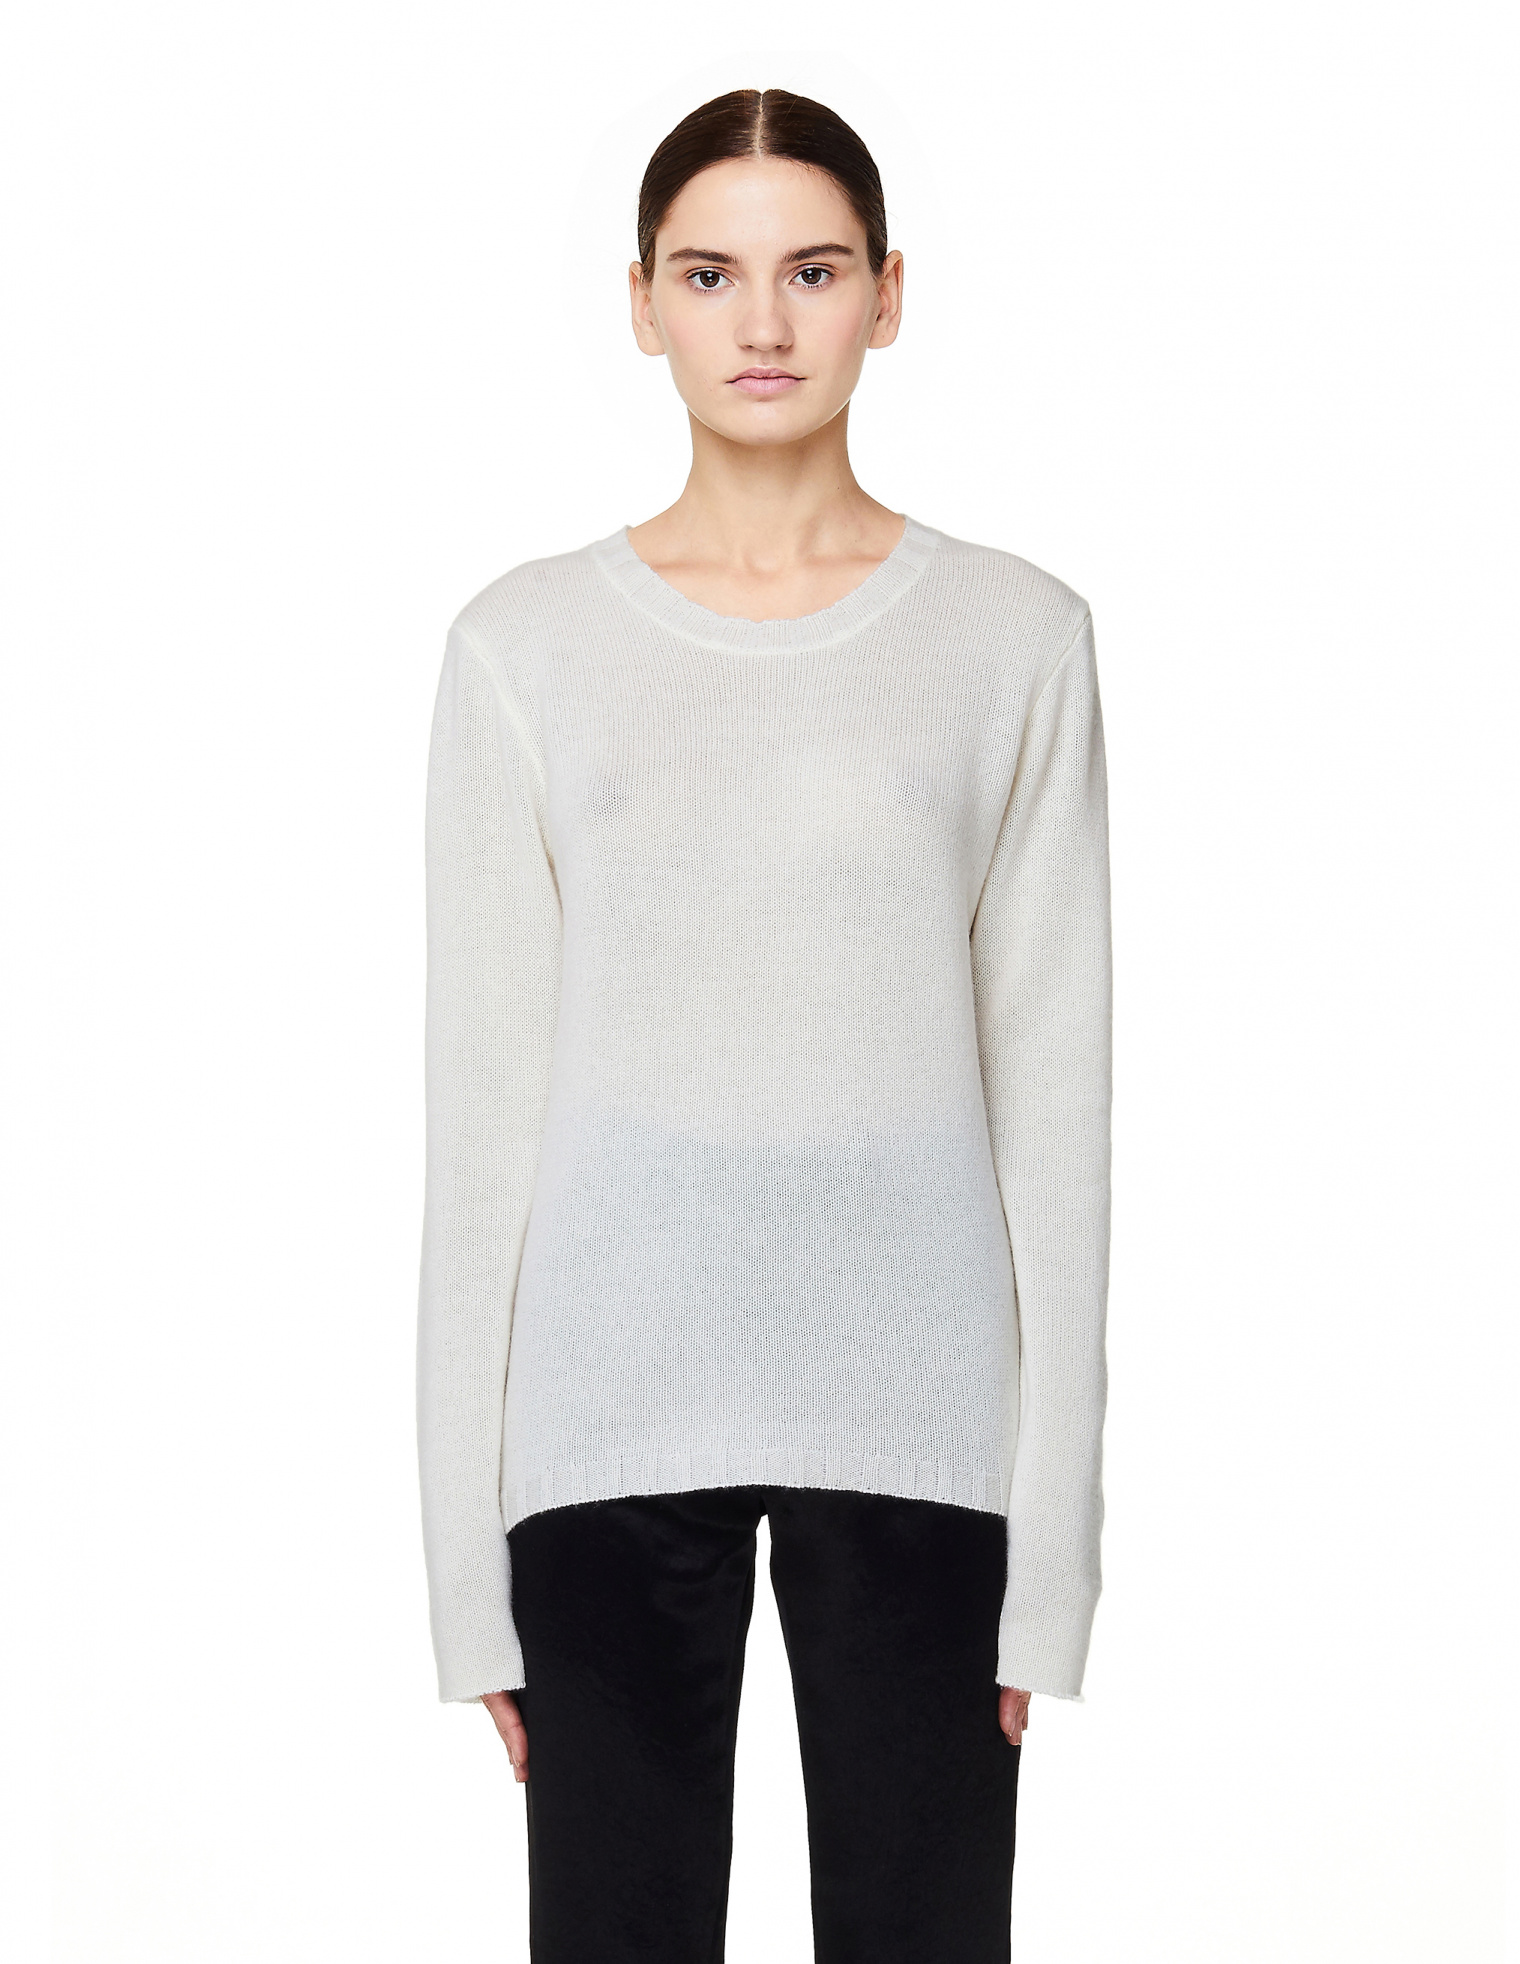 James Perse Sweater